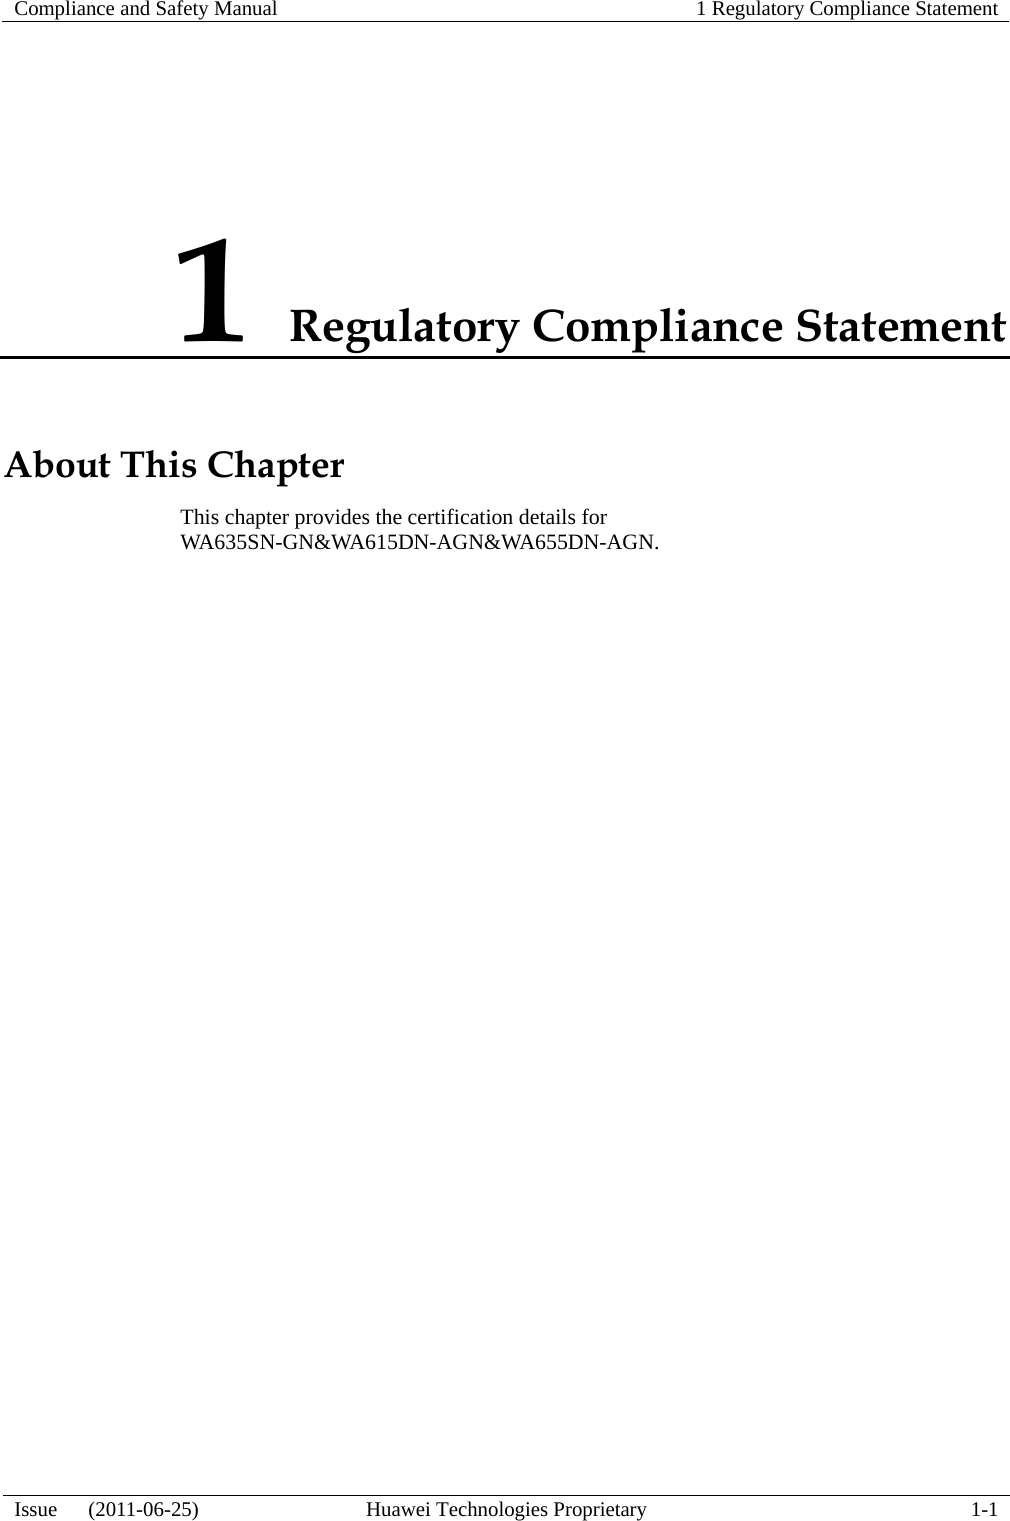   Compliance and Safety Manual  1 Regulatory Compliance Statement  Issue   (2011-06-25)  Huawei Technologies Proprietary  1-1 1 Regulatory Compliance Statement About This Chapter This chapter provides the certification details for WA635SN-GN&amp;WA615DN-AGN&amp;WA655DN-AGN. 